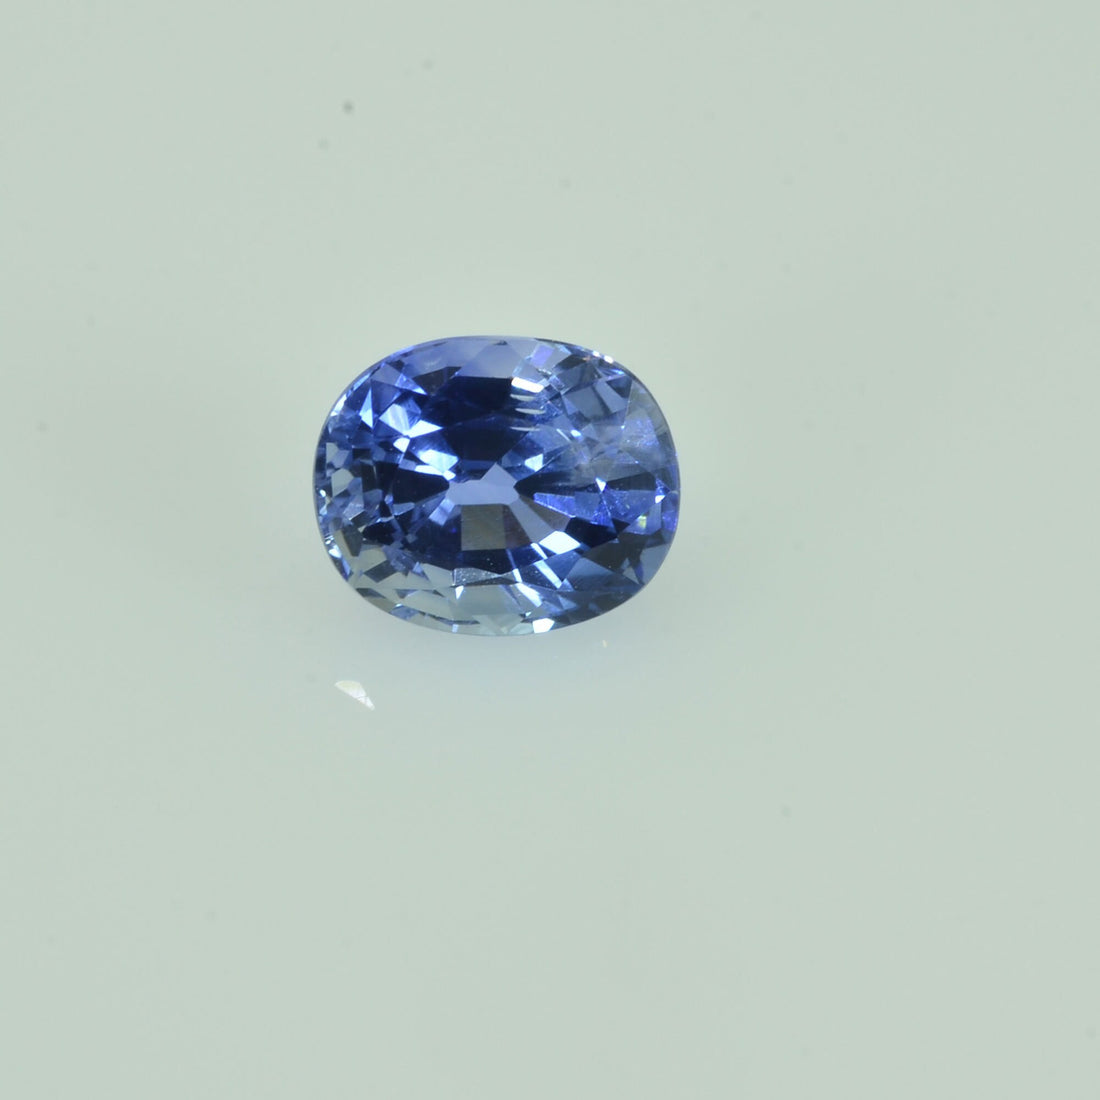 1.18 cts Natural Blue Sapphire Loose Gemstone Oval Cut